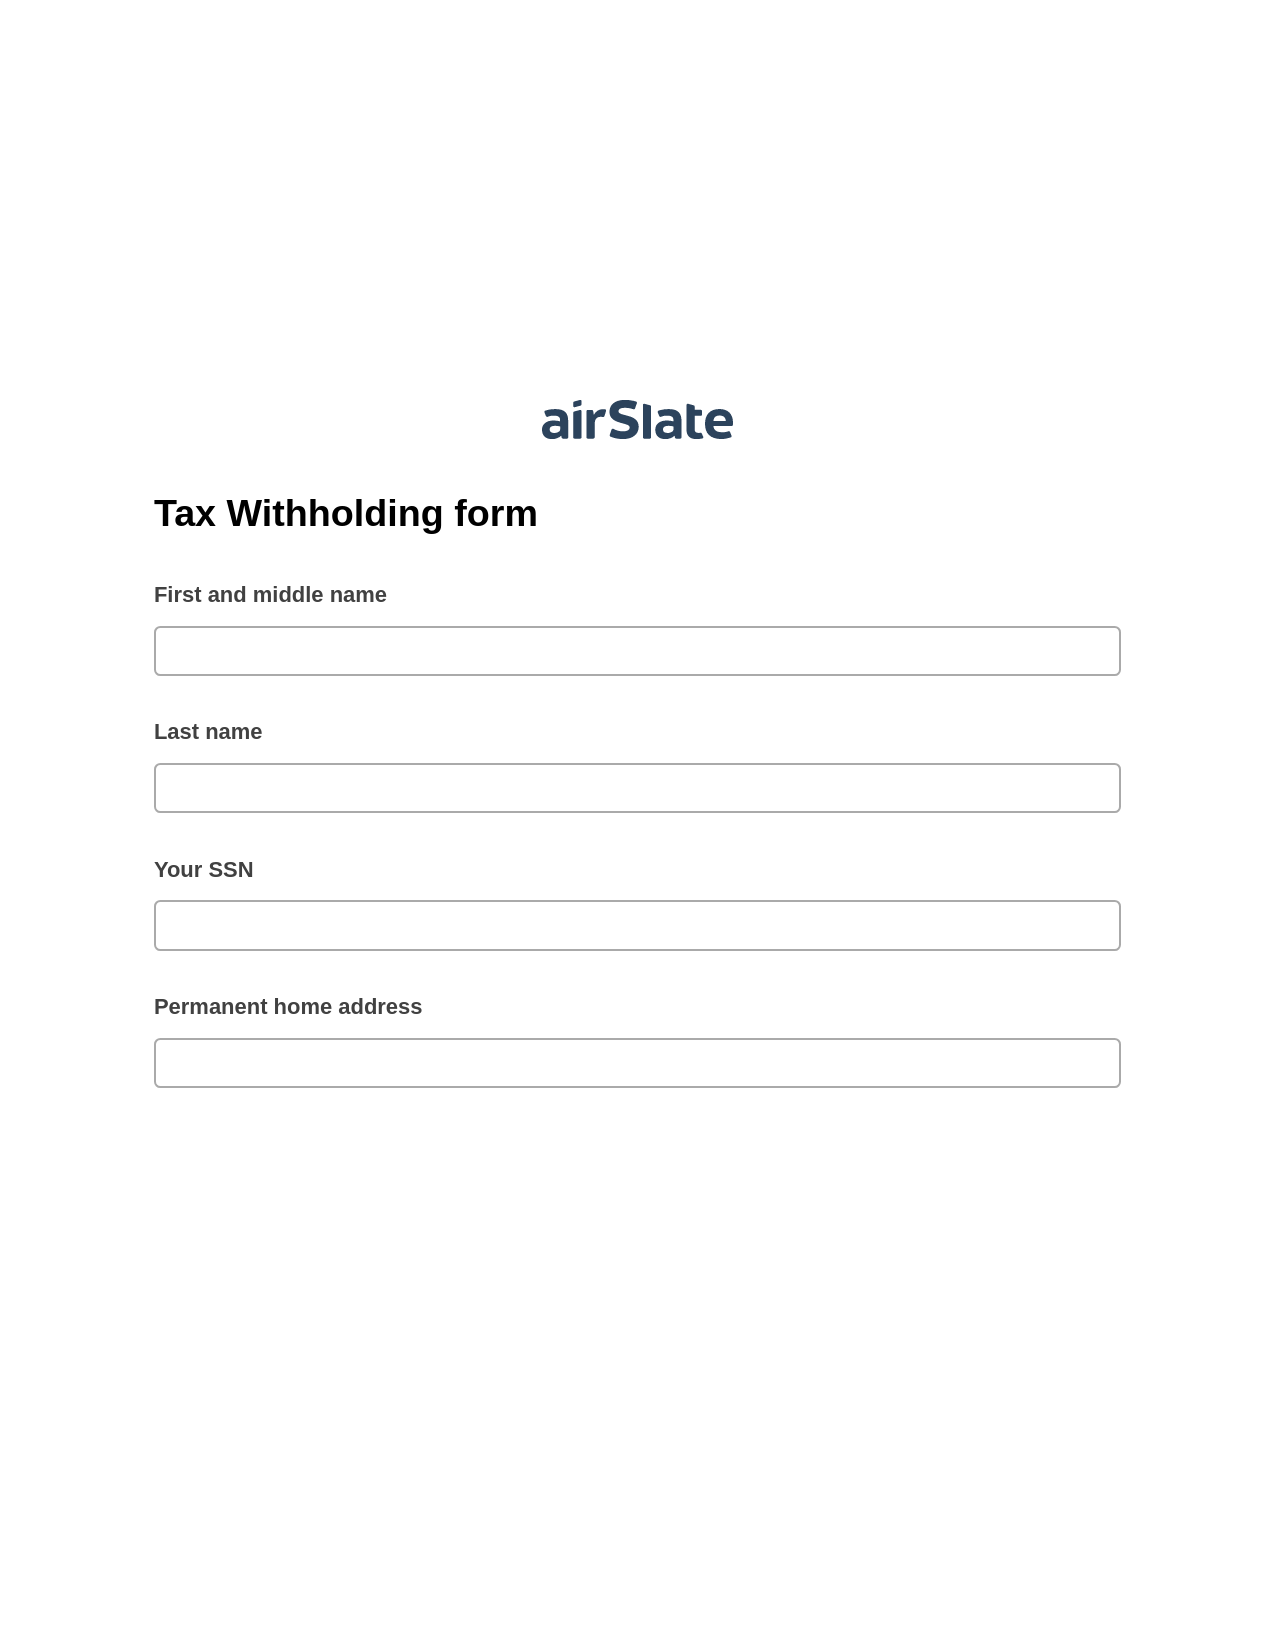 Multirole Tax Withholding form Pre-fill from Salesforce Records via SOQL Bot, Create slate addon, Post-finish Document Bot